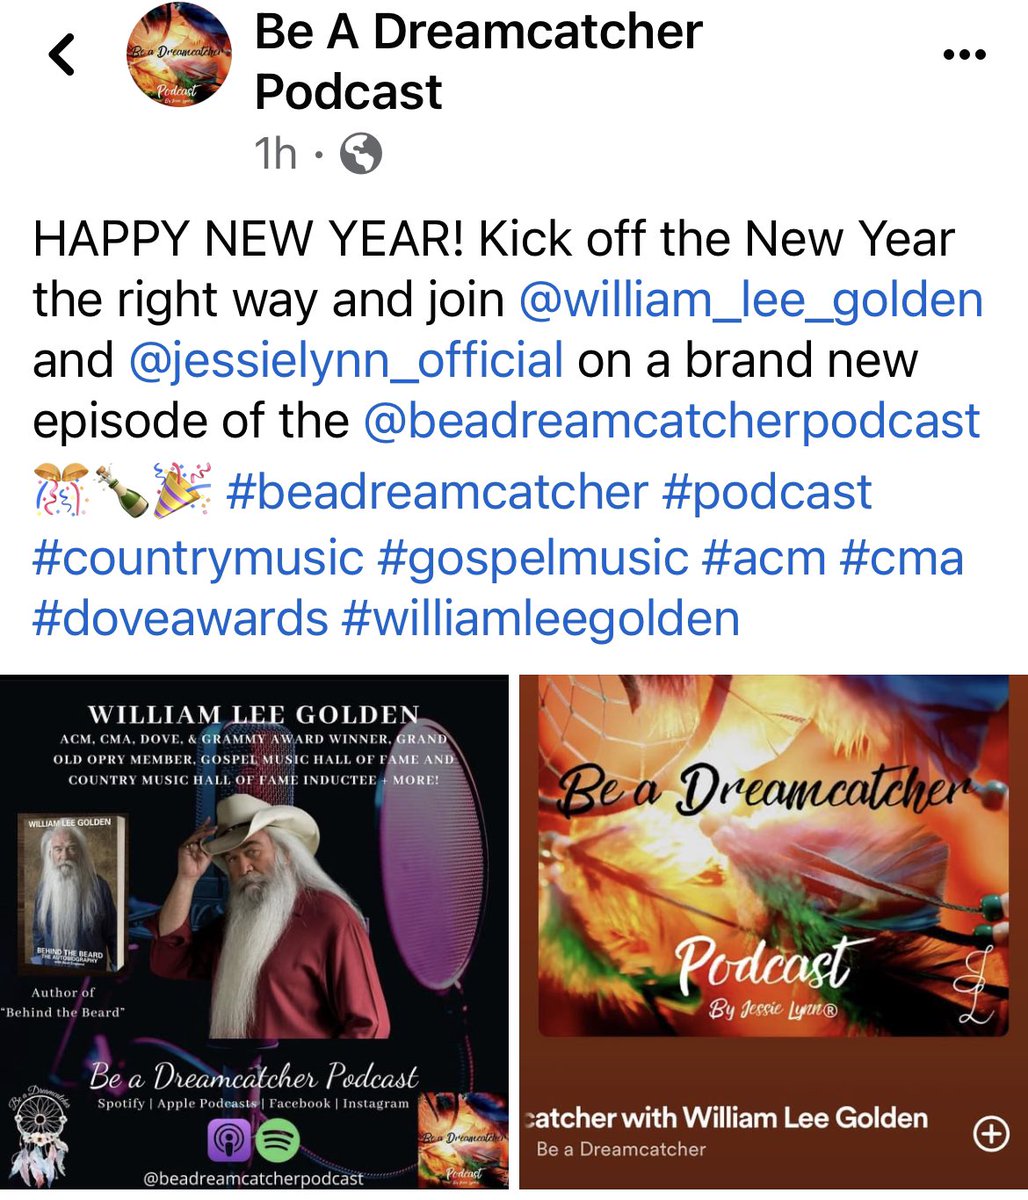 HAPPY NEW YEAR! Kick off the New Year the right way and join @william_lee_golden and @jessielynn_official on a brand new episode of the @beadreamcatcherpodcast 🎊🍾🎉 #beadreamcatcher #podcast #countrymusic #gospelmusic #acm #cma #doveawards #williamleegolden @JeffPanzer2